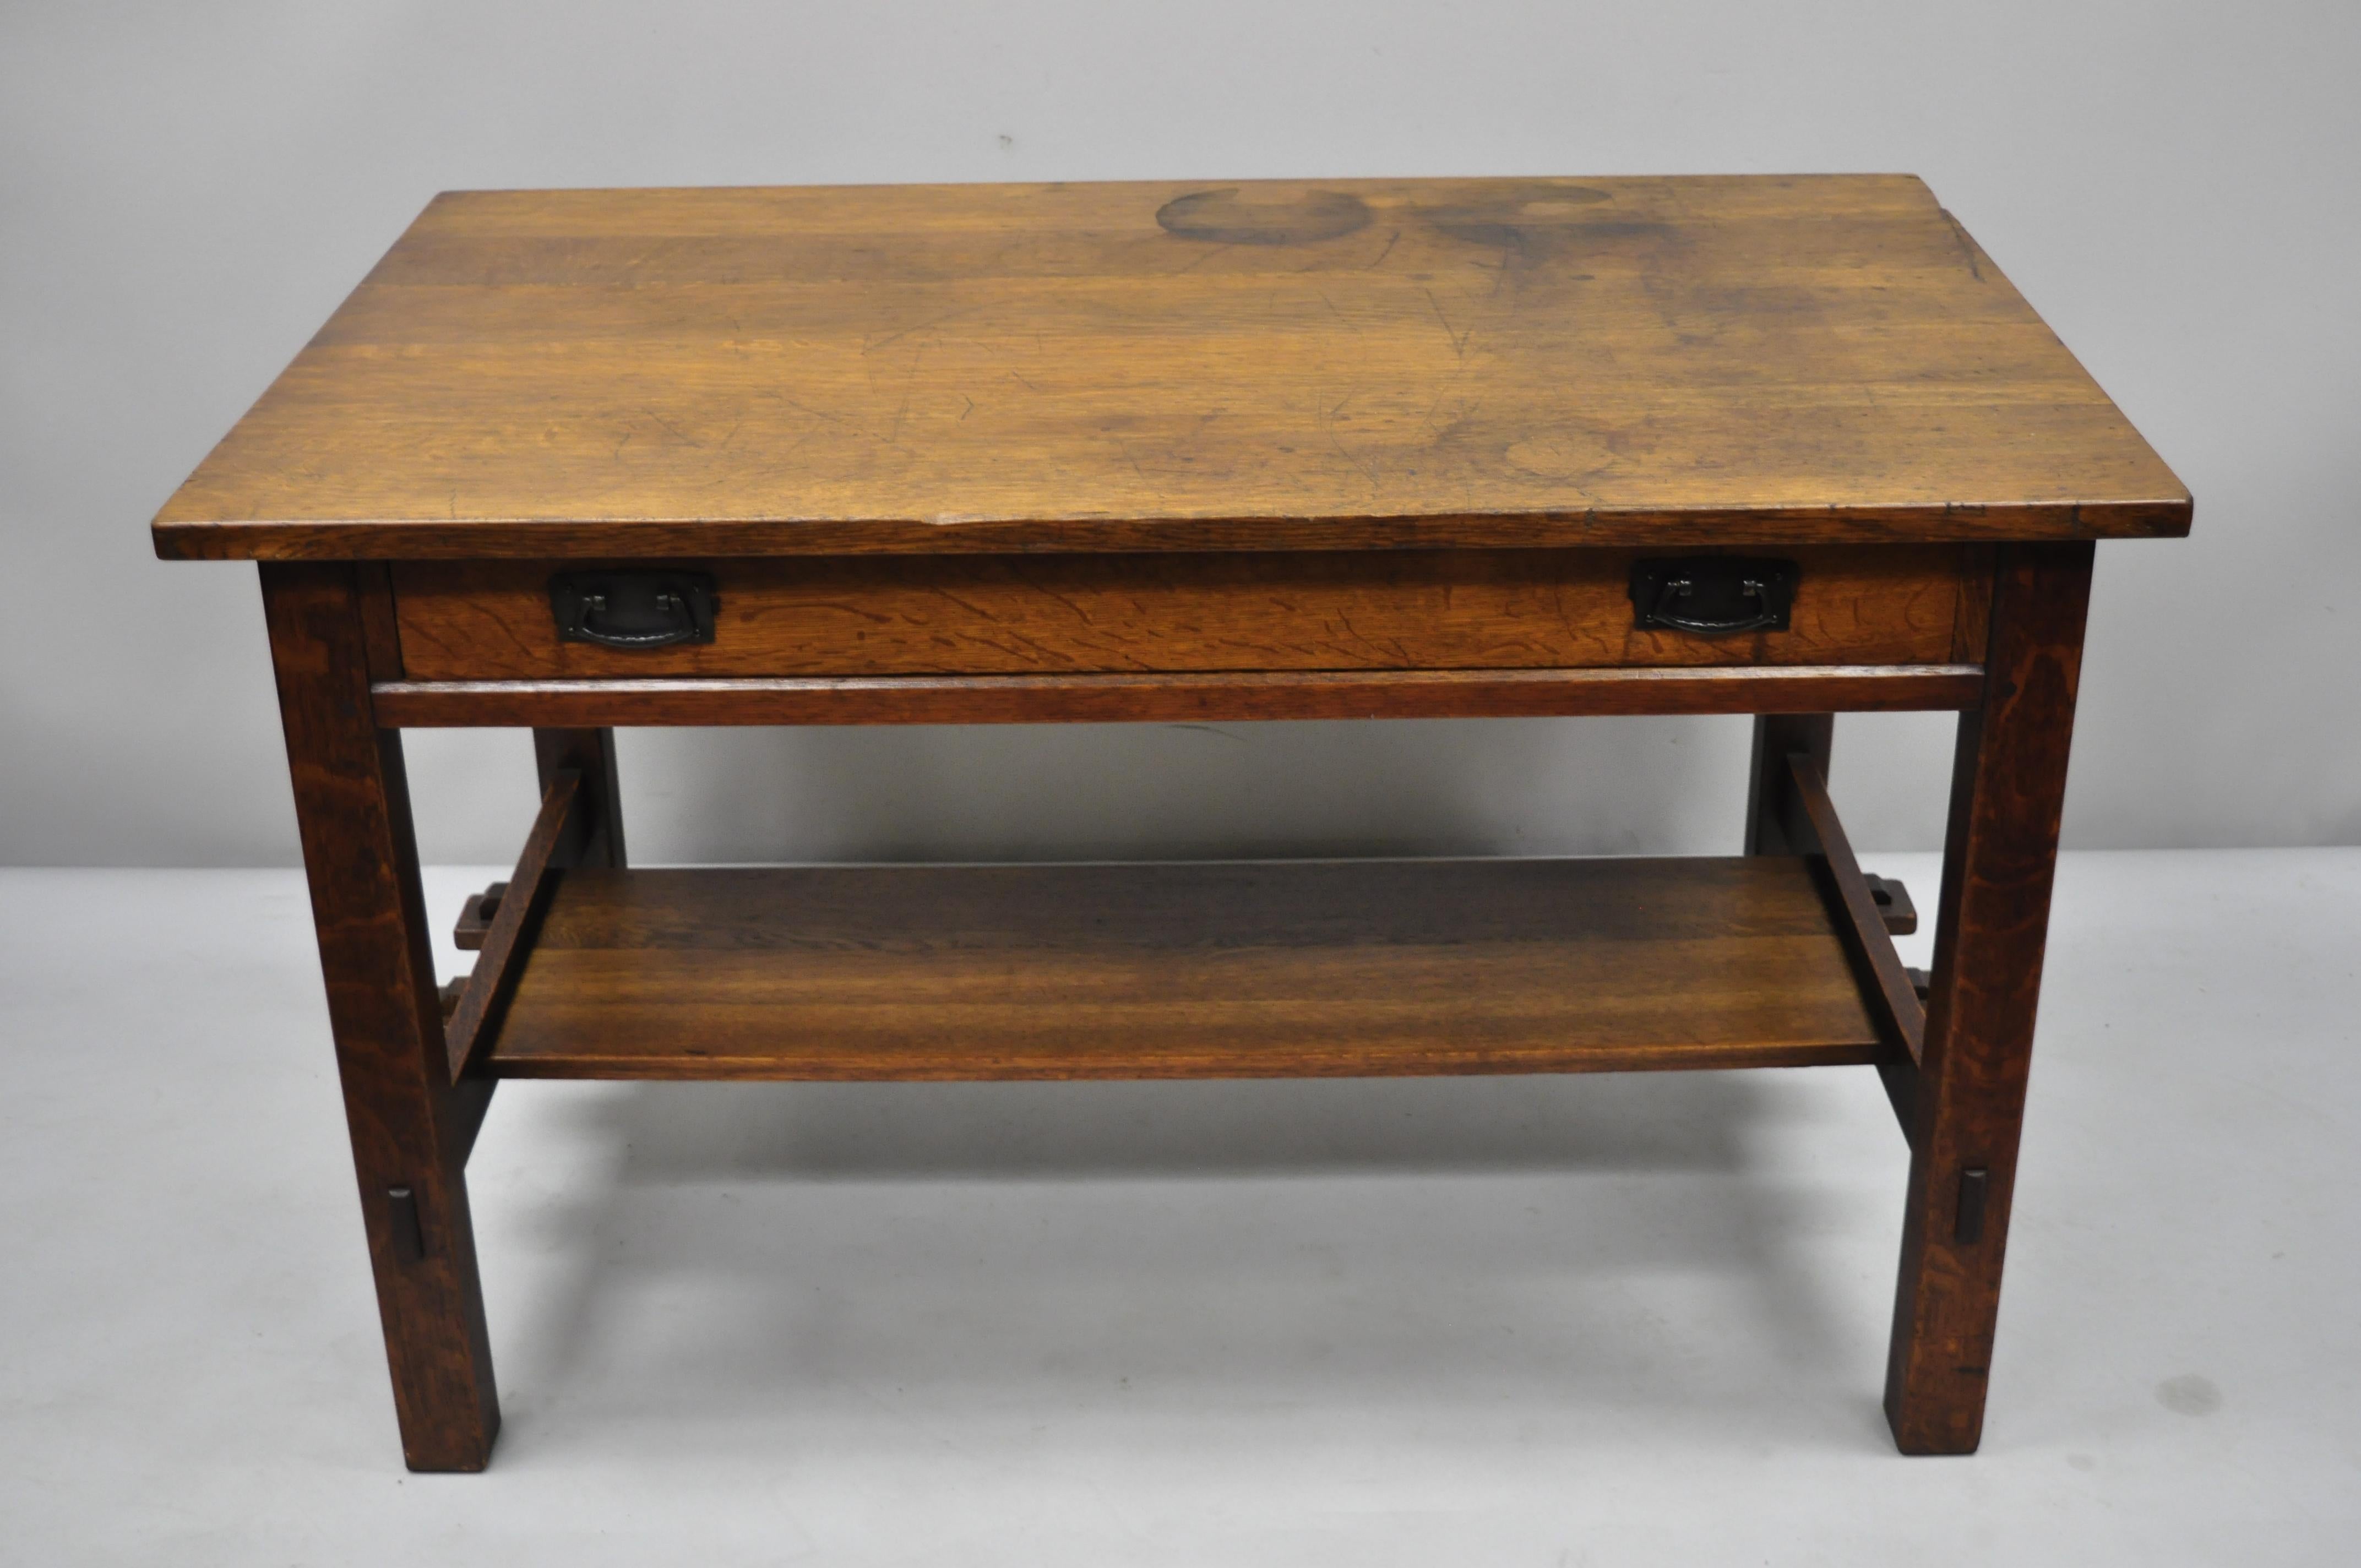 L & J.G. Stickley Library table desk #531 one drawer mission oak Arts & Crafts. Item features model #531 with drawer, rectangular top, original copper hardwood, double key and tenon construction, beautiful woodgrain, finished back, original label, 1